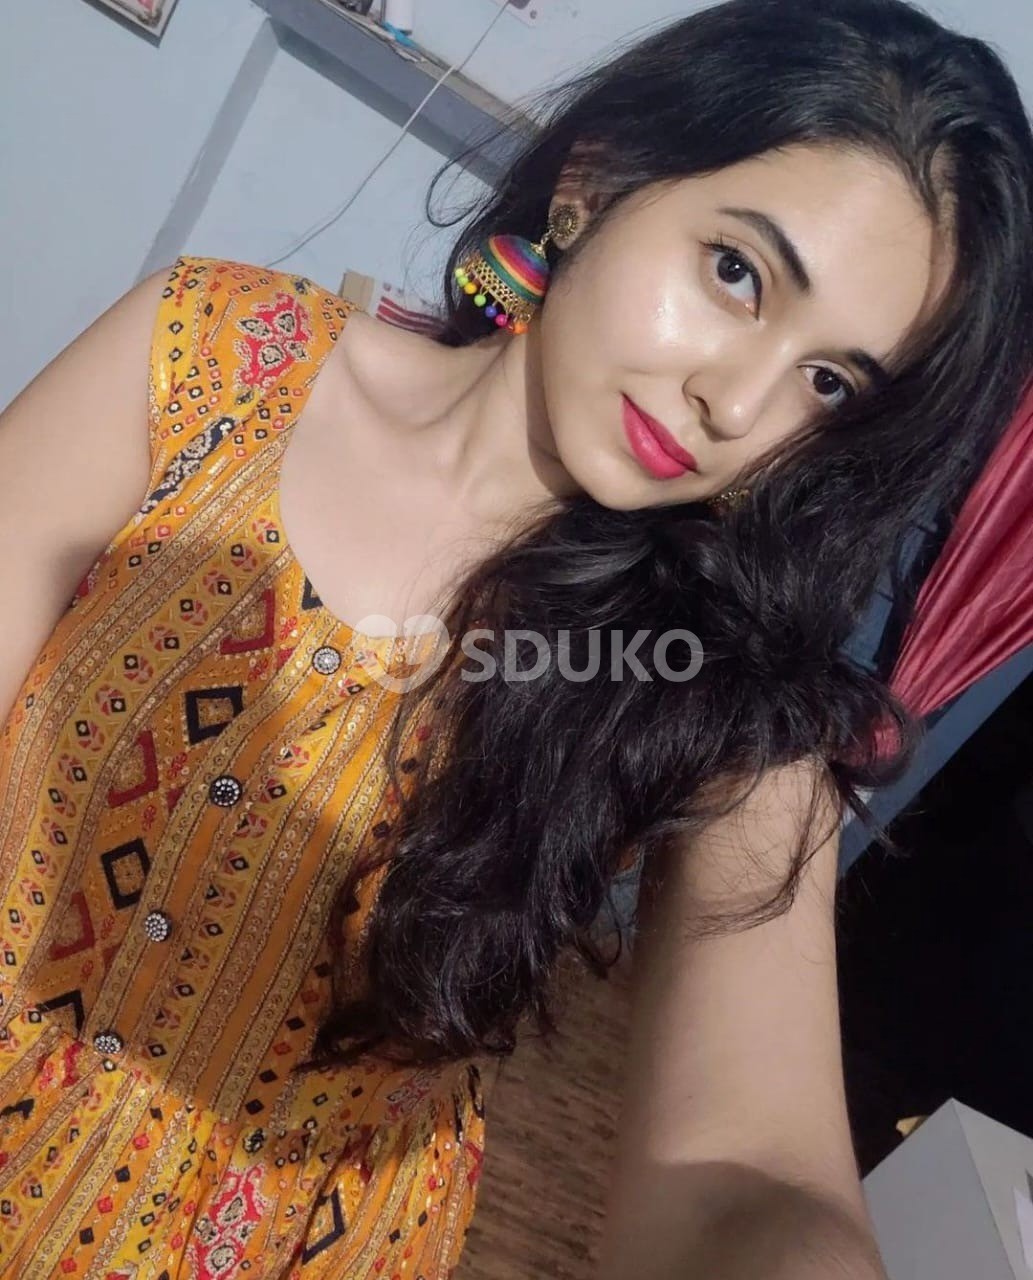 Genuine⏩ Vidisha NOW' VIP TODAY LOW PRICE/TOP INDEPENDENCE VIP (ESCORT) BEST HIGH PROFILE GIRL'S AVAILABLE CALL ME___: